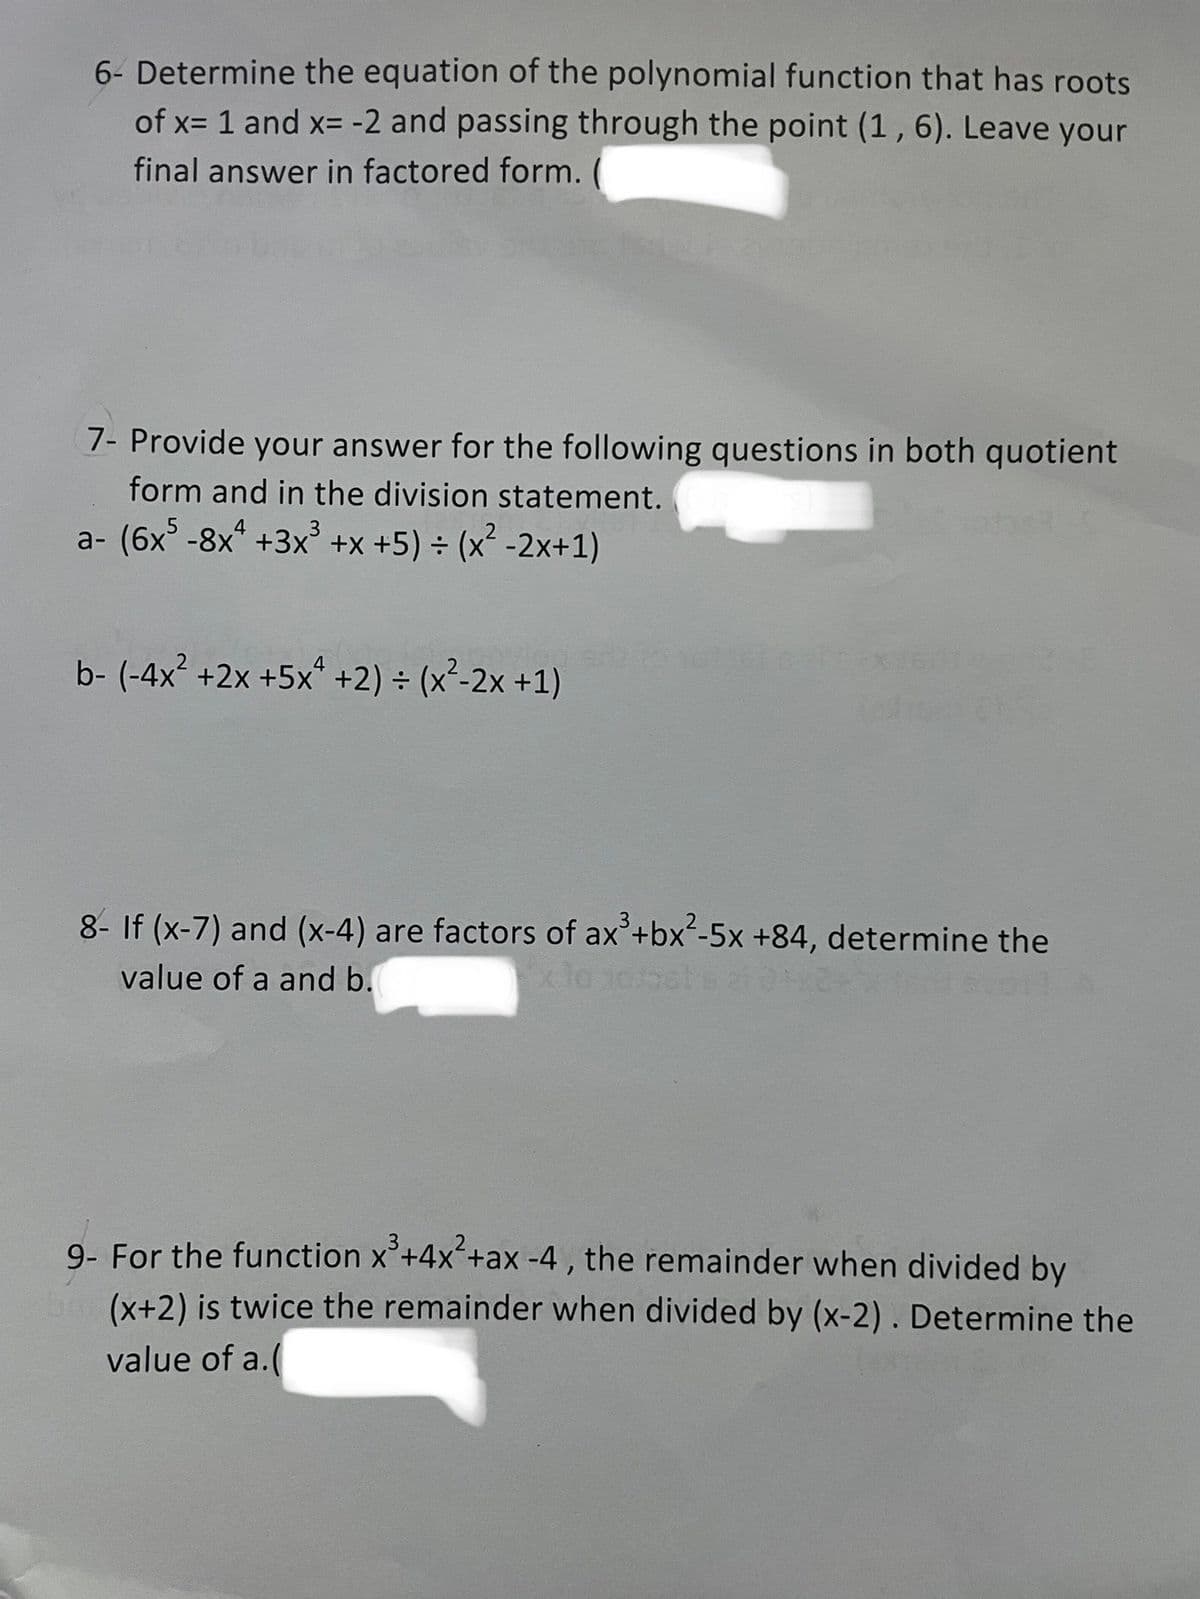 6- Determine the equation of the polynomial function that has roots
of x= 1 and x= -2 and passing through the point (1, 6). Leave your
final answer in factored form.
7- Provide your answer for the following questions in both quotient
form and in the division statement.
a- (6x5 -8xª +3x³ +x+5) = (x² -2x+1)
b- (-4x²+2x+5x+2) = (x²-2x+1)
€145
8- If (x-7) and (x-4) are factors of ax³ + bx²-5x +84, determine the
value of a and b.
x le jotast s
9- For the function x³+4x²+ax -4, the remainder when divided by
(x+2) is twice the remainder when divided by (x-2). Determine the
value of a.(